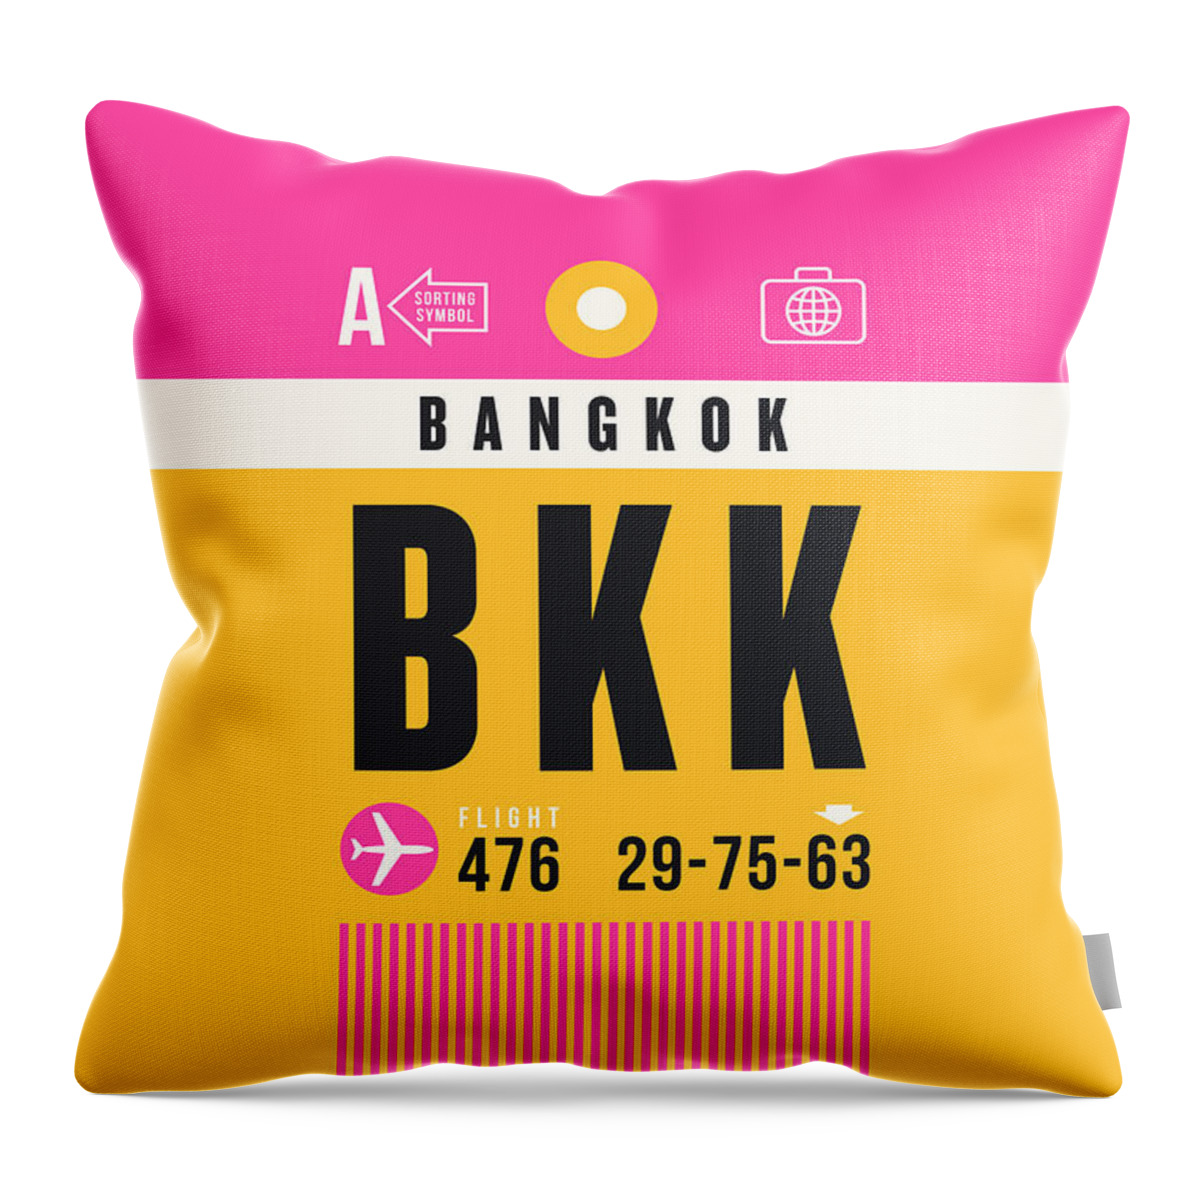 Airline Throw Pillow featuring the digital art Luggage Tag A - BKK Bangkok Thailand by Organic Synthesis